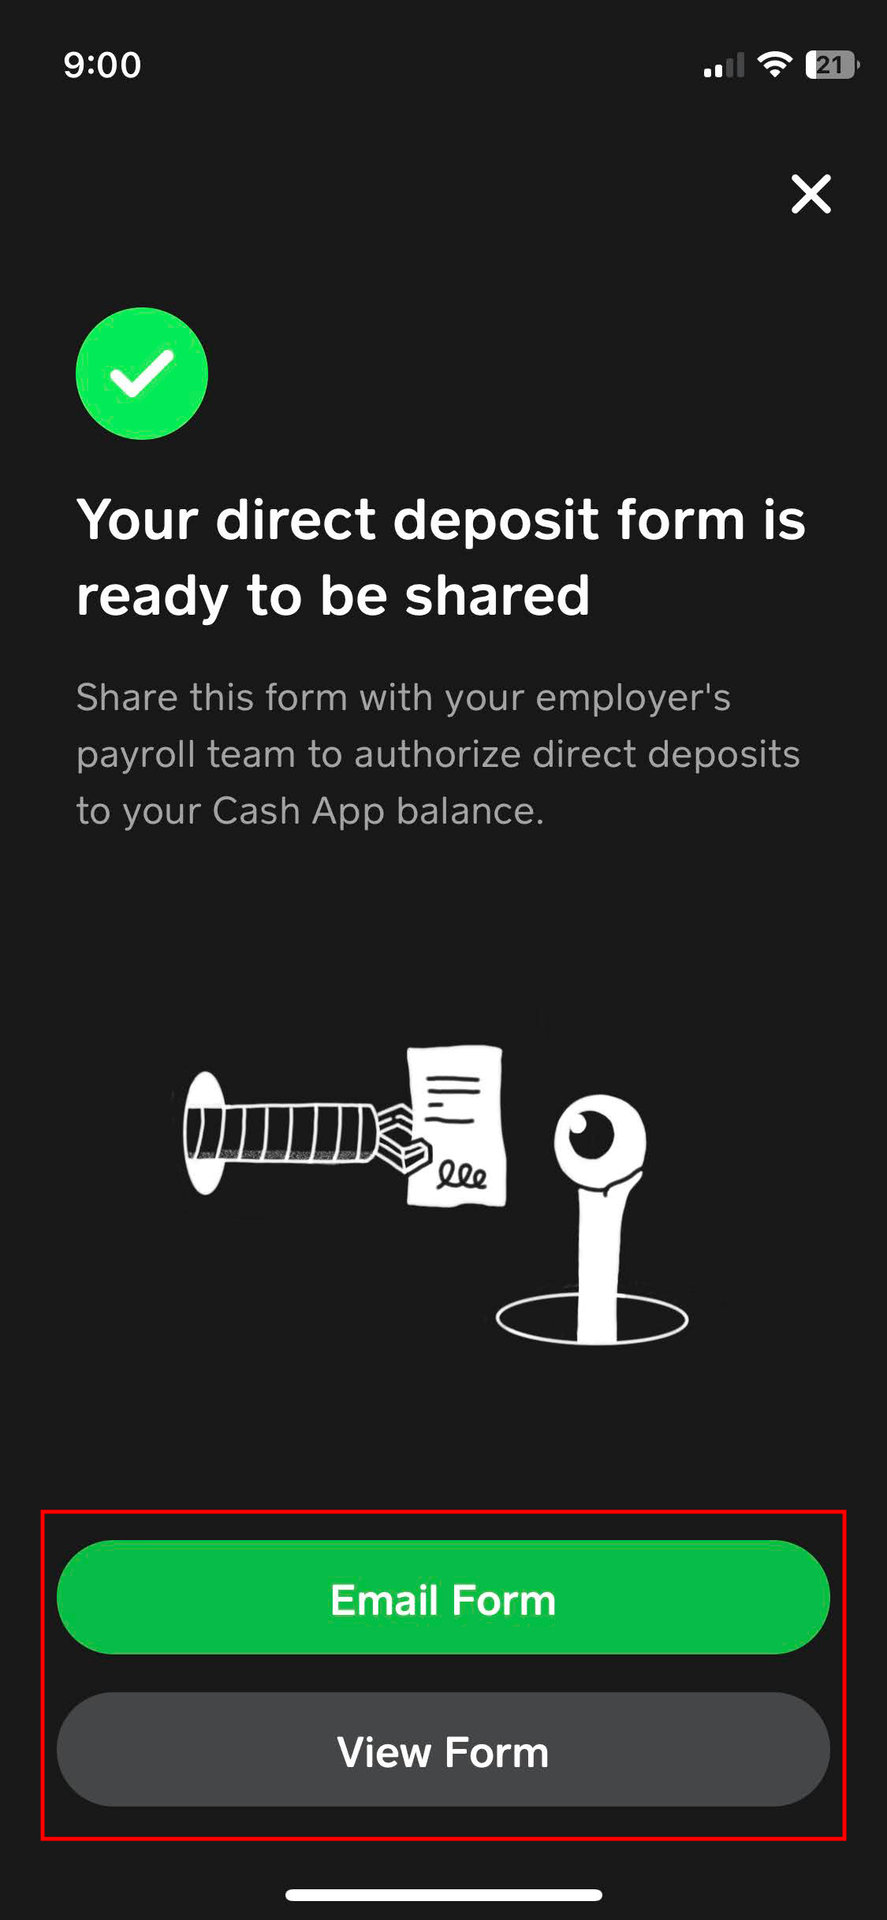 How to get a direct deposit form from Cash App 11